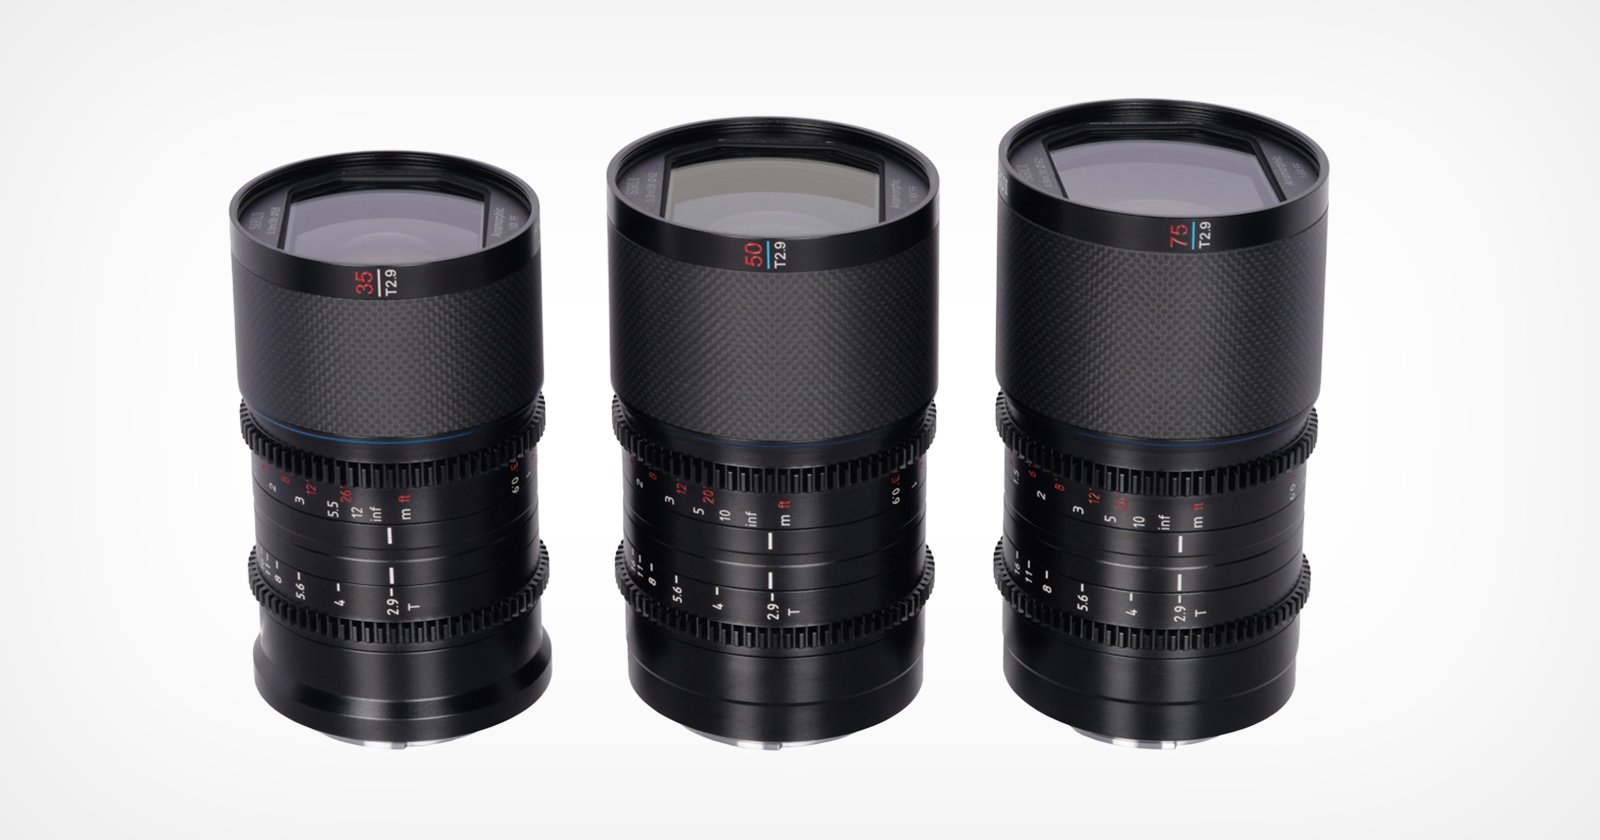 Siruis T2.9 Saturn Series Anamorphic Lenses are Worlds Lightest